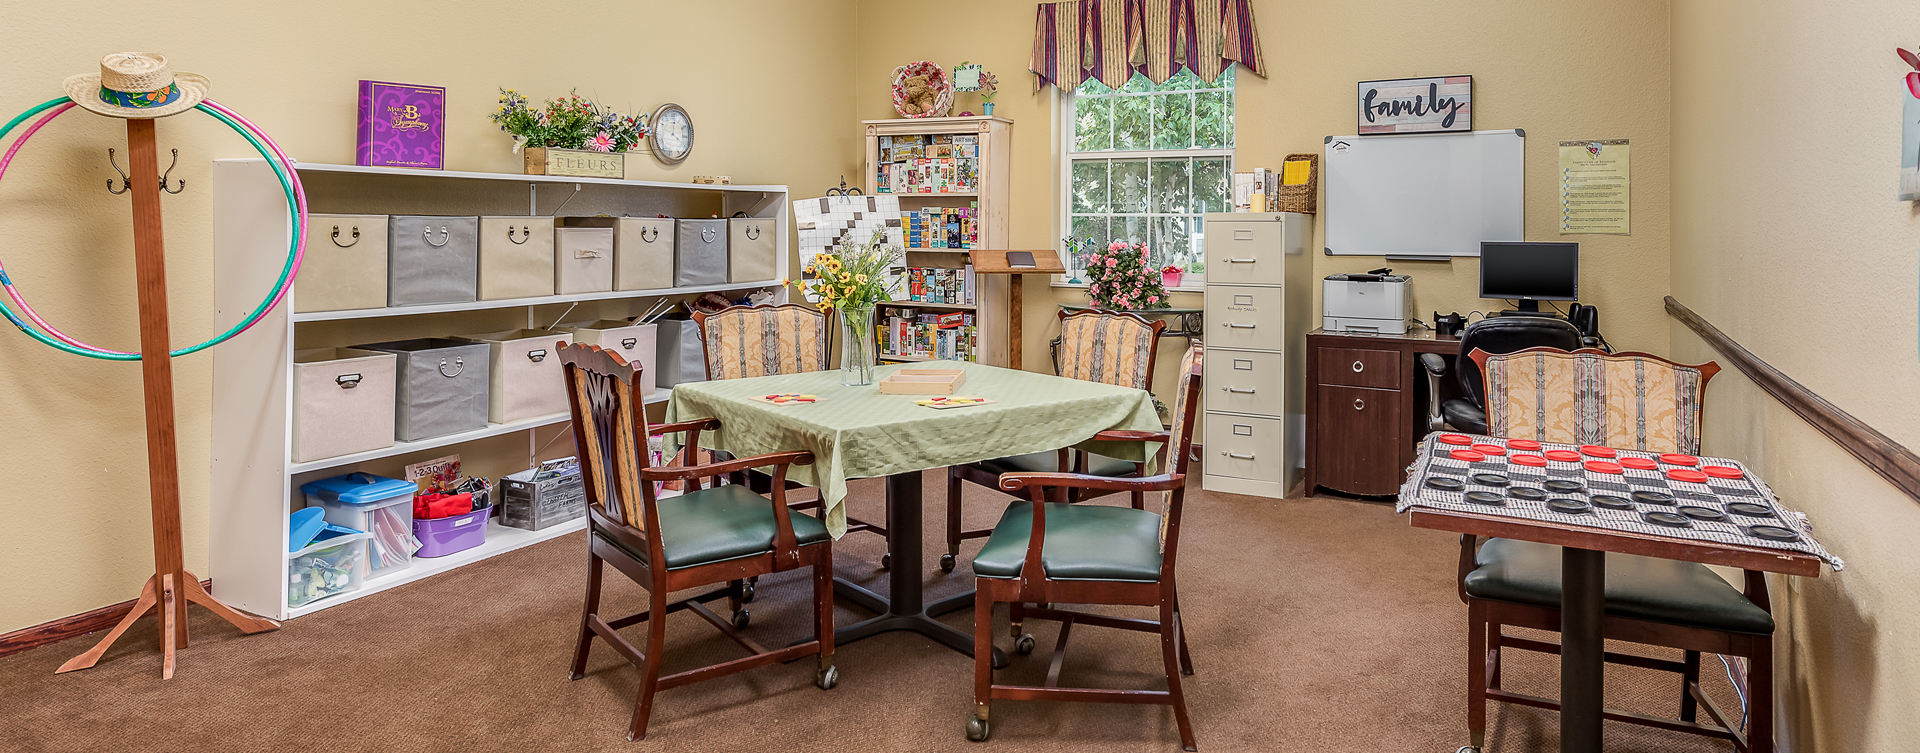 Enjoy a good card game with friends in the activity room at Bickford of Saginaw Township